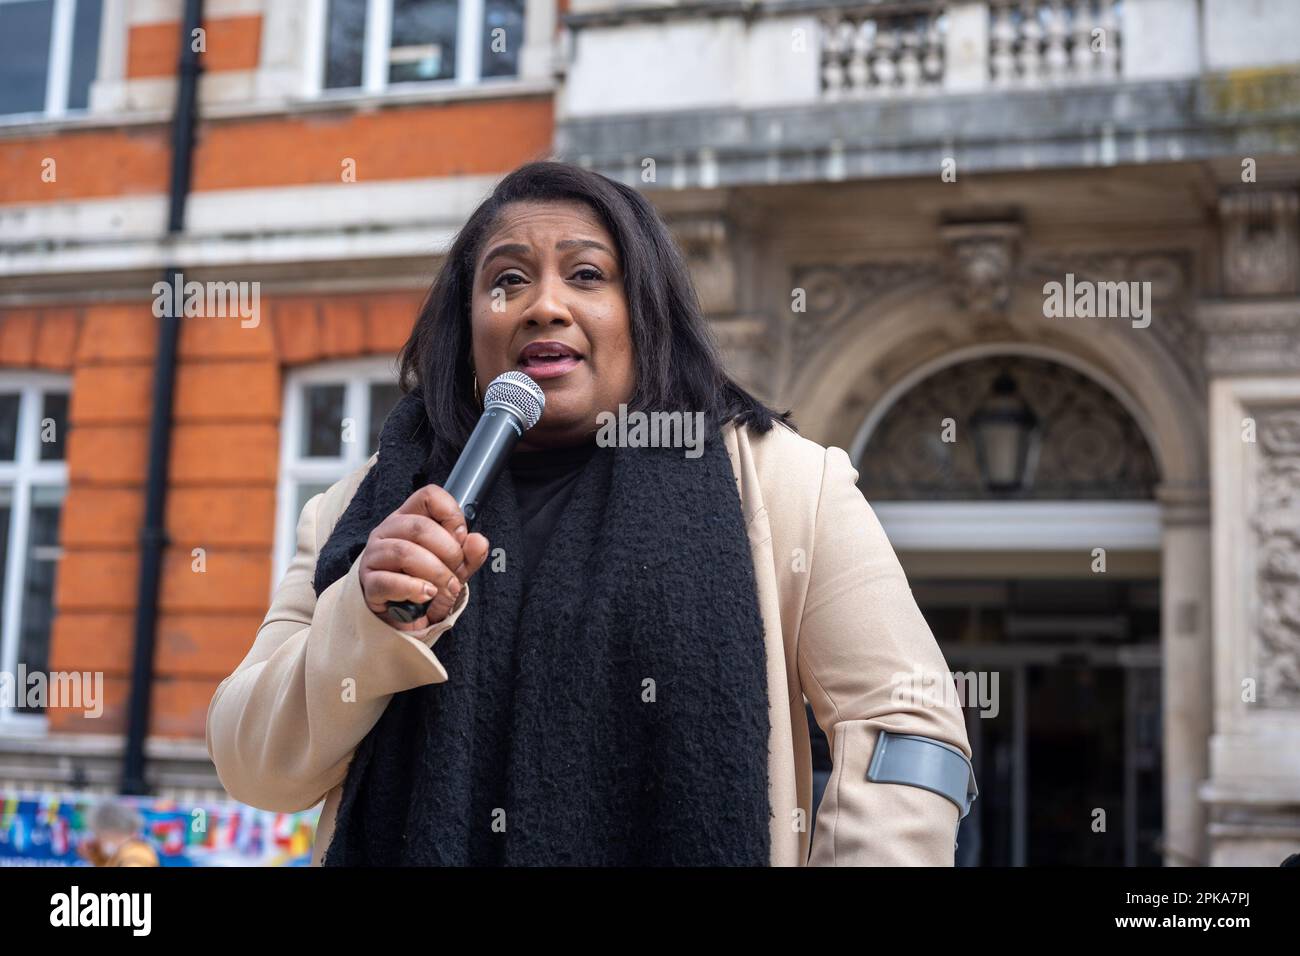 London, UK. 6th Apr 2023. People gathered in Windrush Square in Brixton to commemorate the 5th anniversary of the Windrush scandal. Aubrey Fagon/Alamy Live News Stock Photo